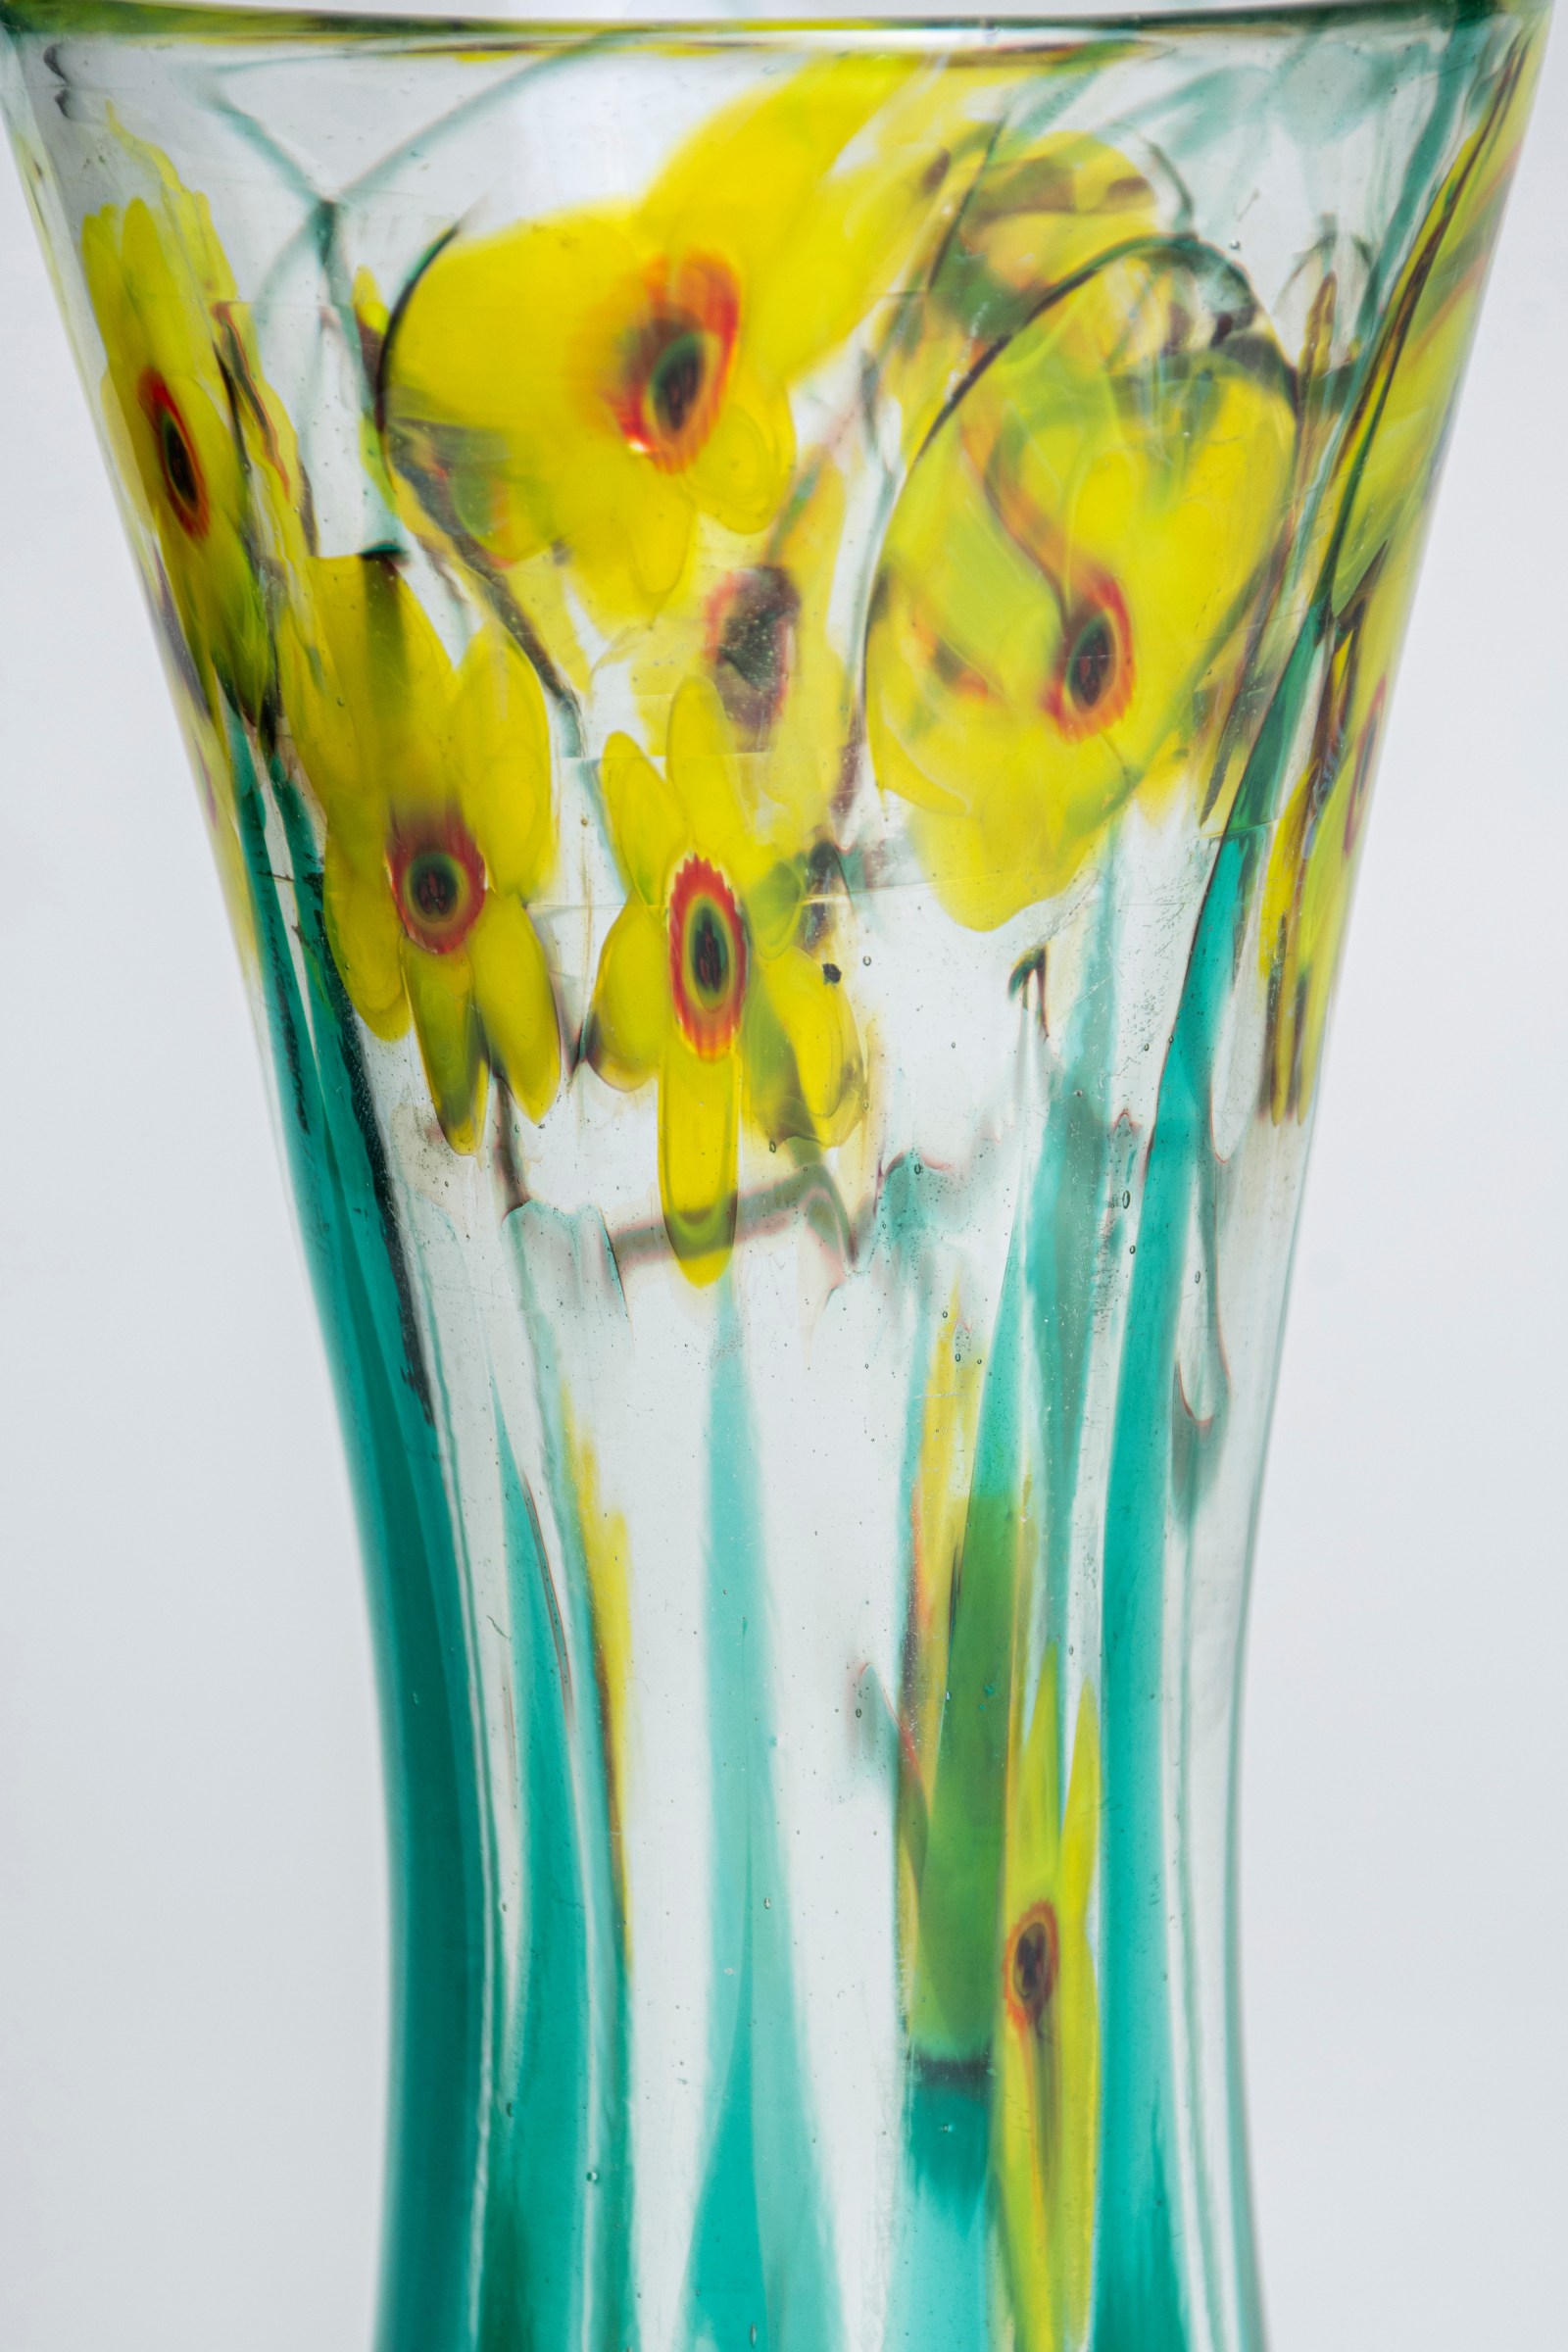 An extreme close up of the tiffany favrile glass floral paperweight vase showcasing the technique used to create the flowers, called millefiori, in which thin tubes of glass are formed together to create an image.